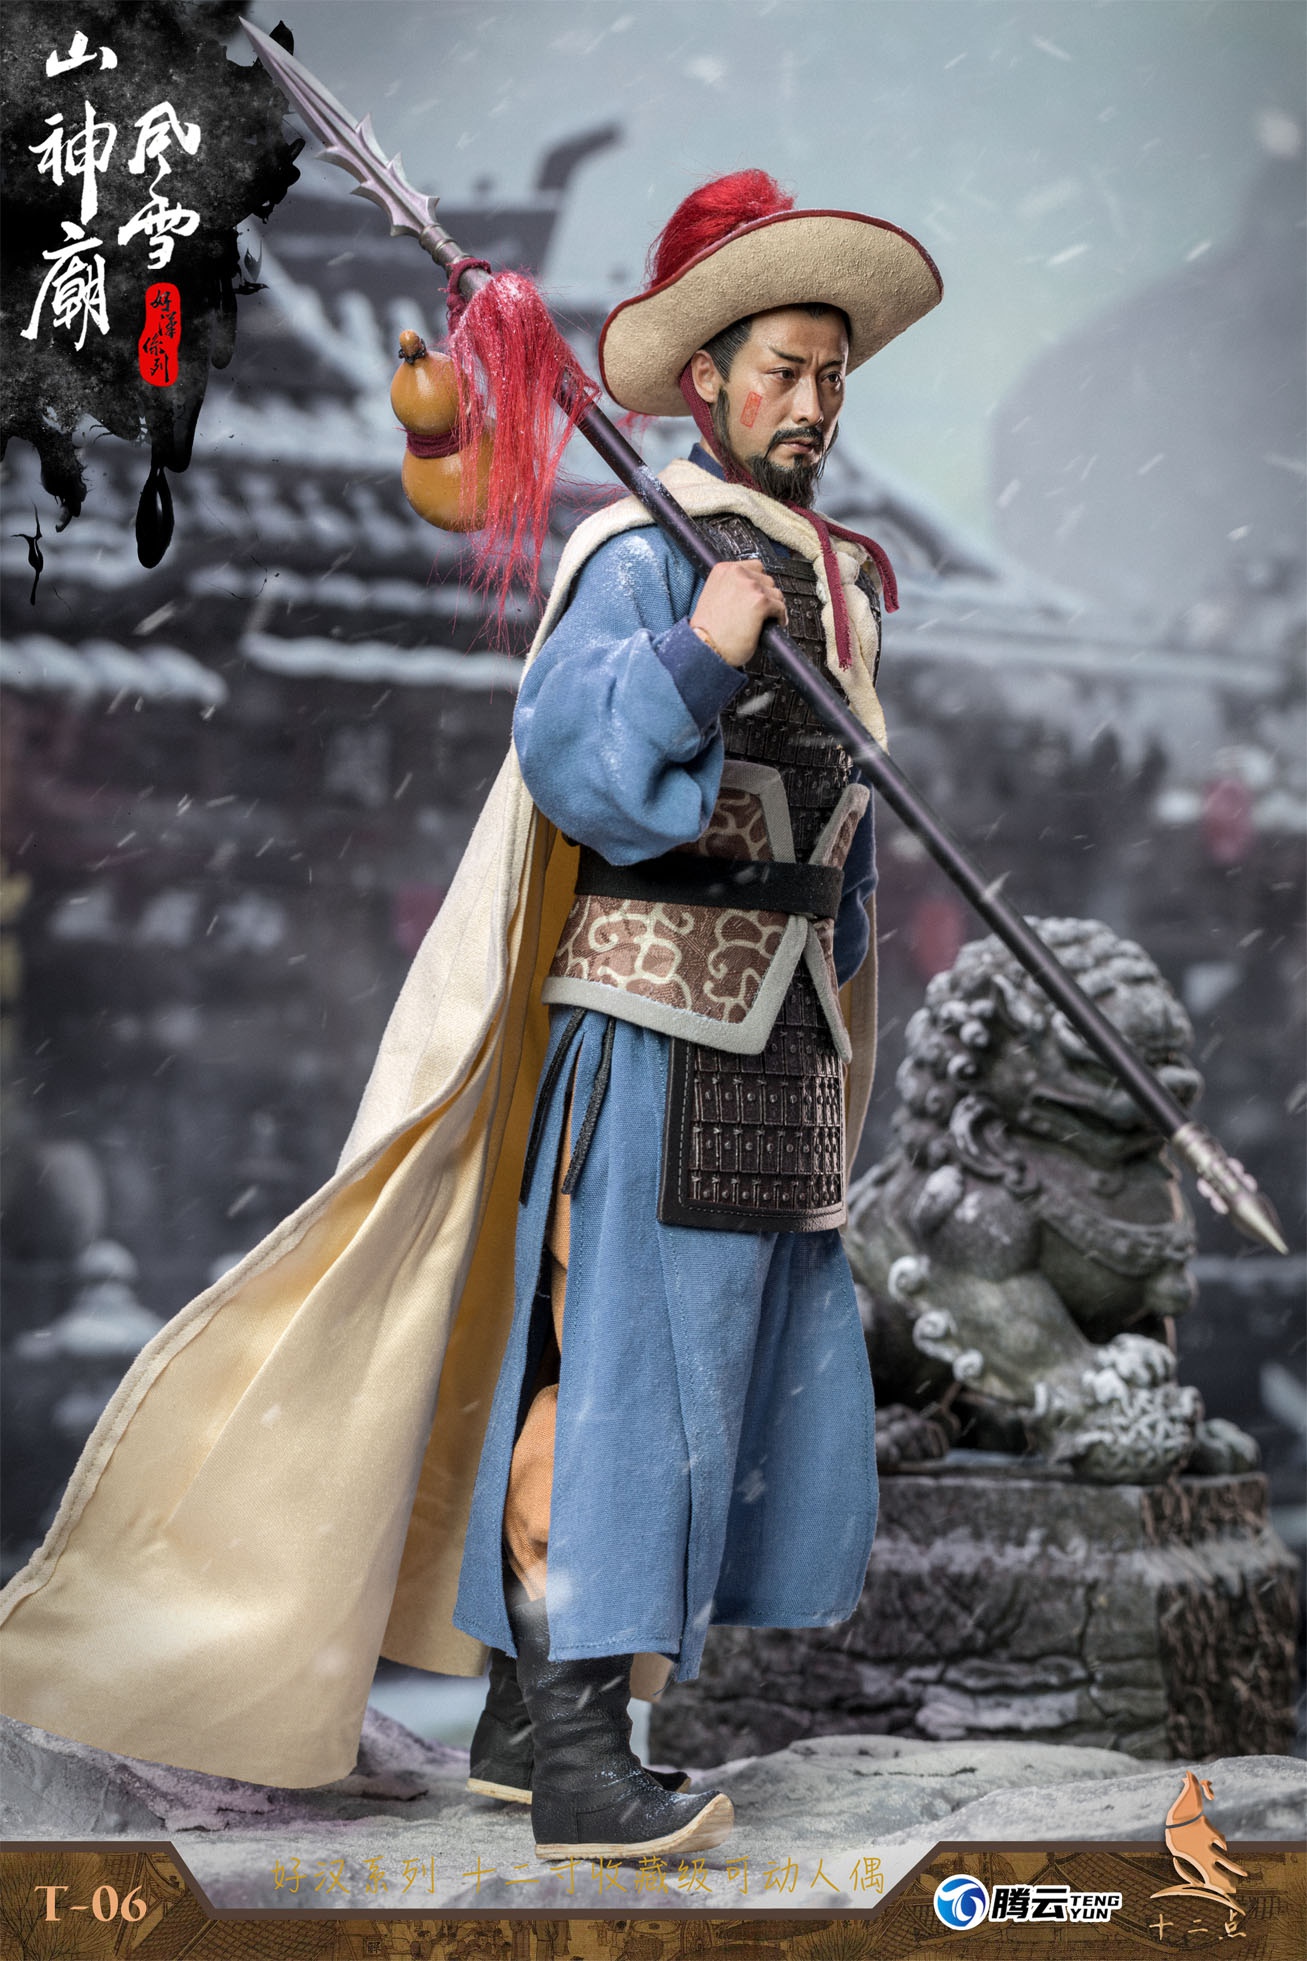 NEW PRODUCT: Twelve - Hero Series - Leopard Head Lin Chong Fengxue Mountain Temple Action Figure (T-05 /T-06) 2040